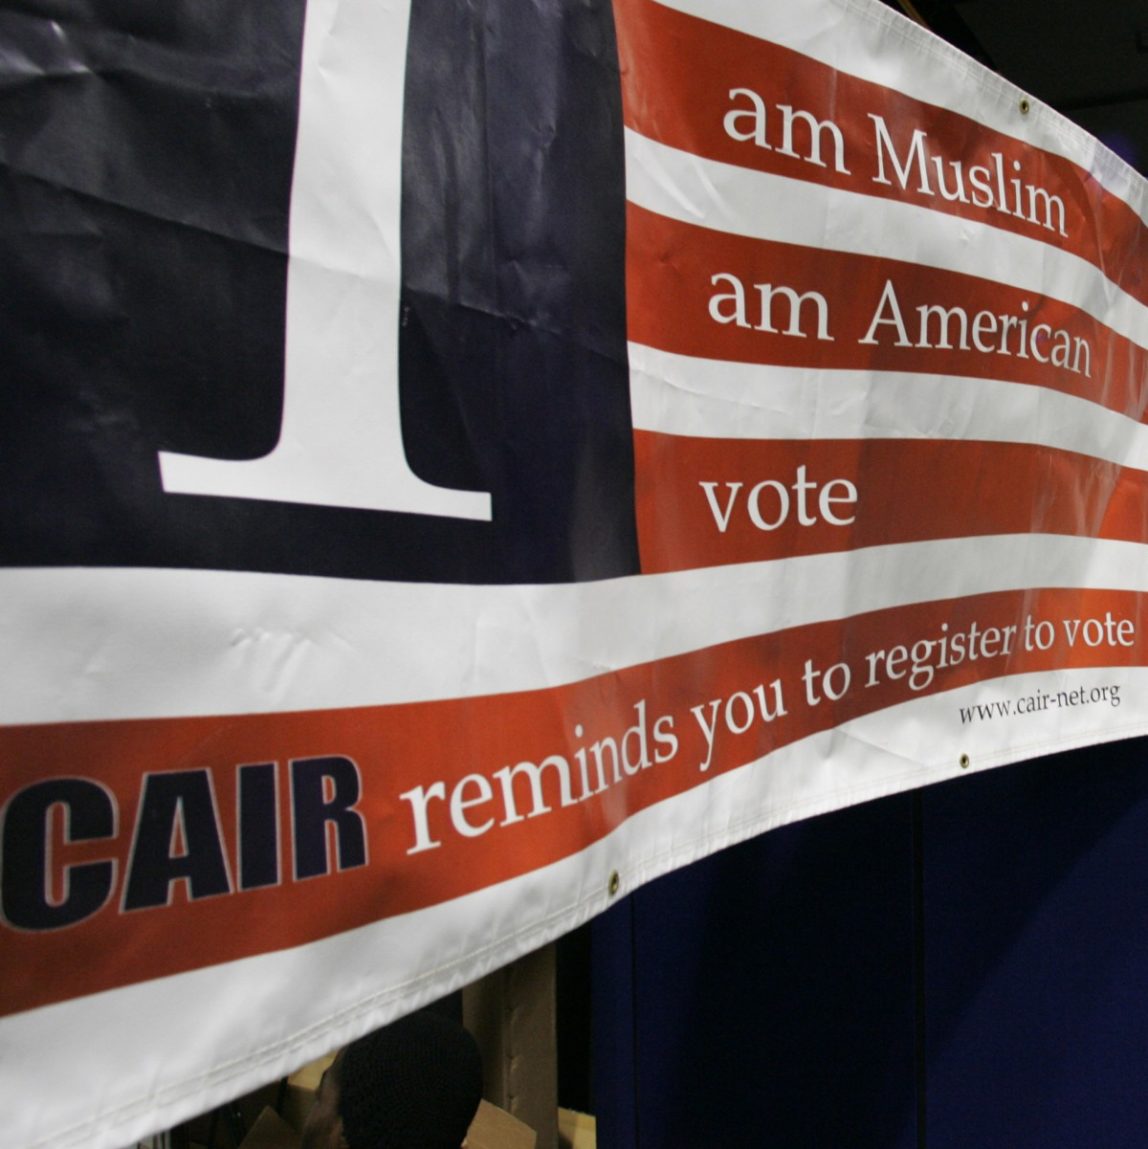 A sign in the bazaar at the 43rd annual ISNA convention encourages participants to register to vote Friday, Sept, 1, 2006 in Rosemont, Ill. (AP Photo/M. Spencer Green)